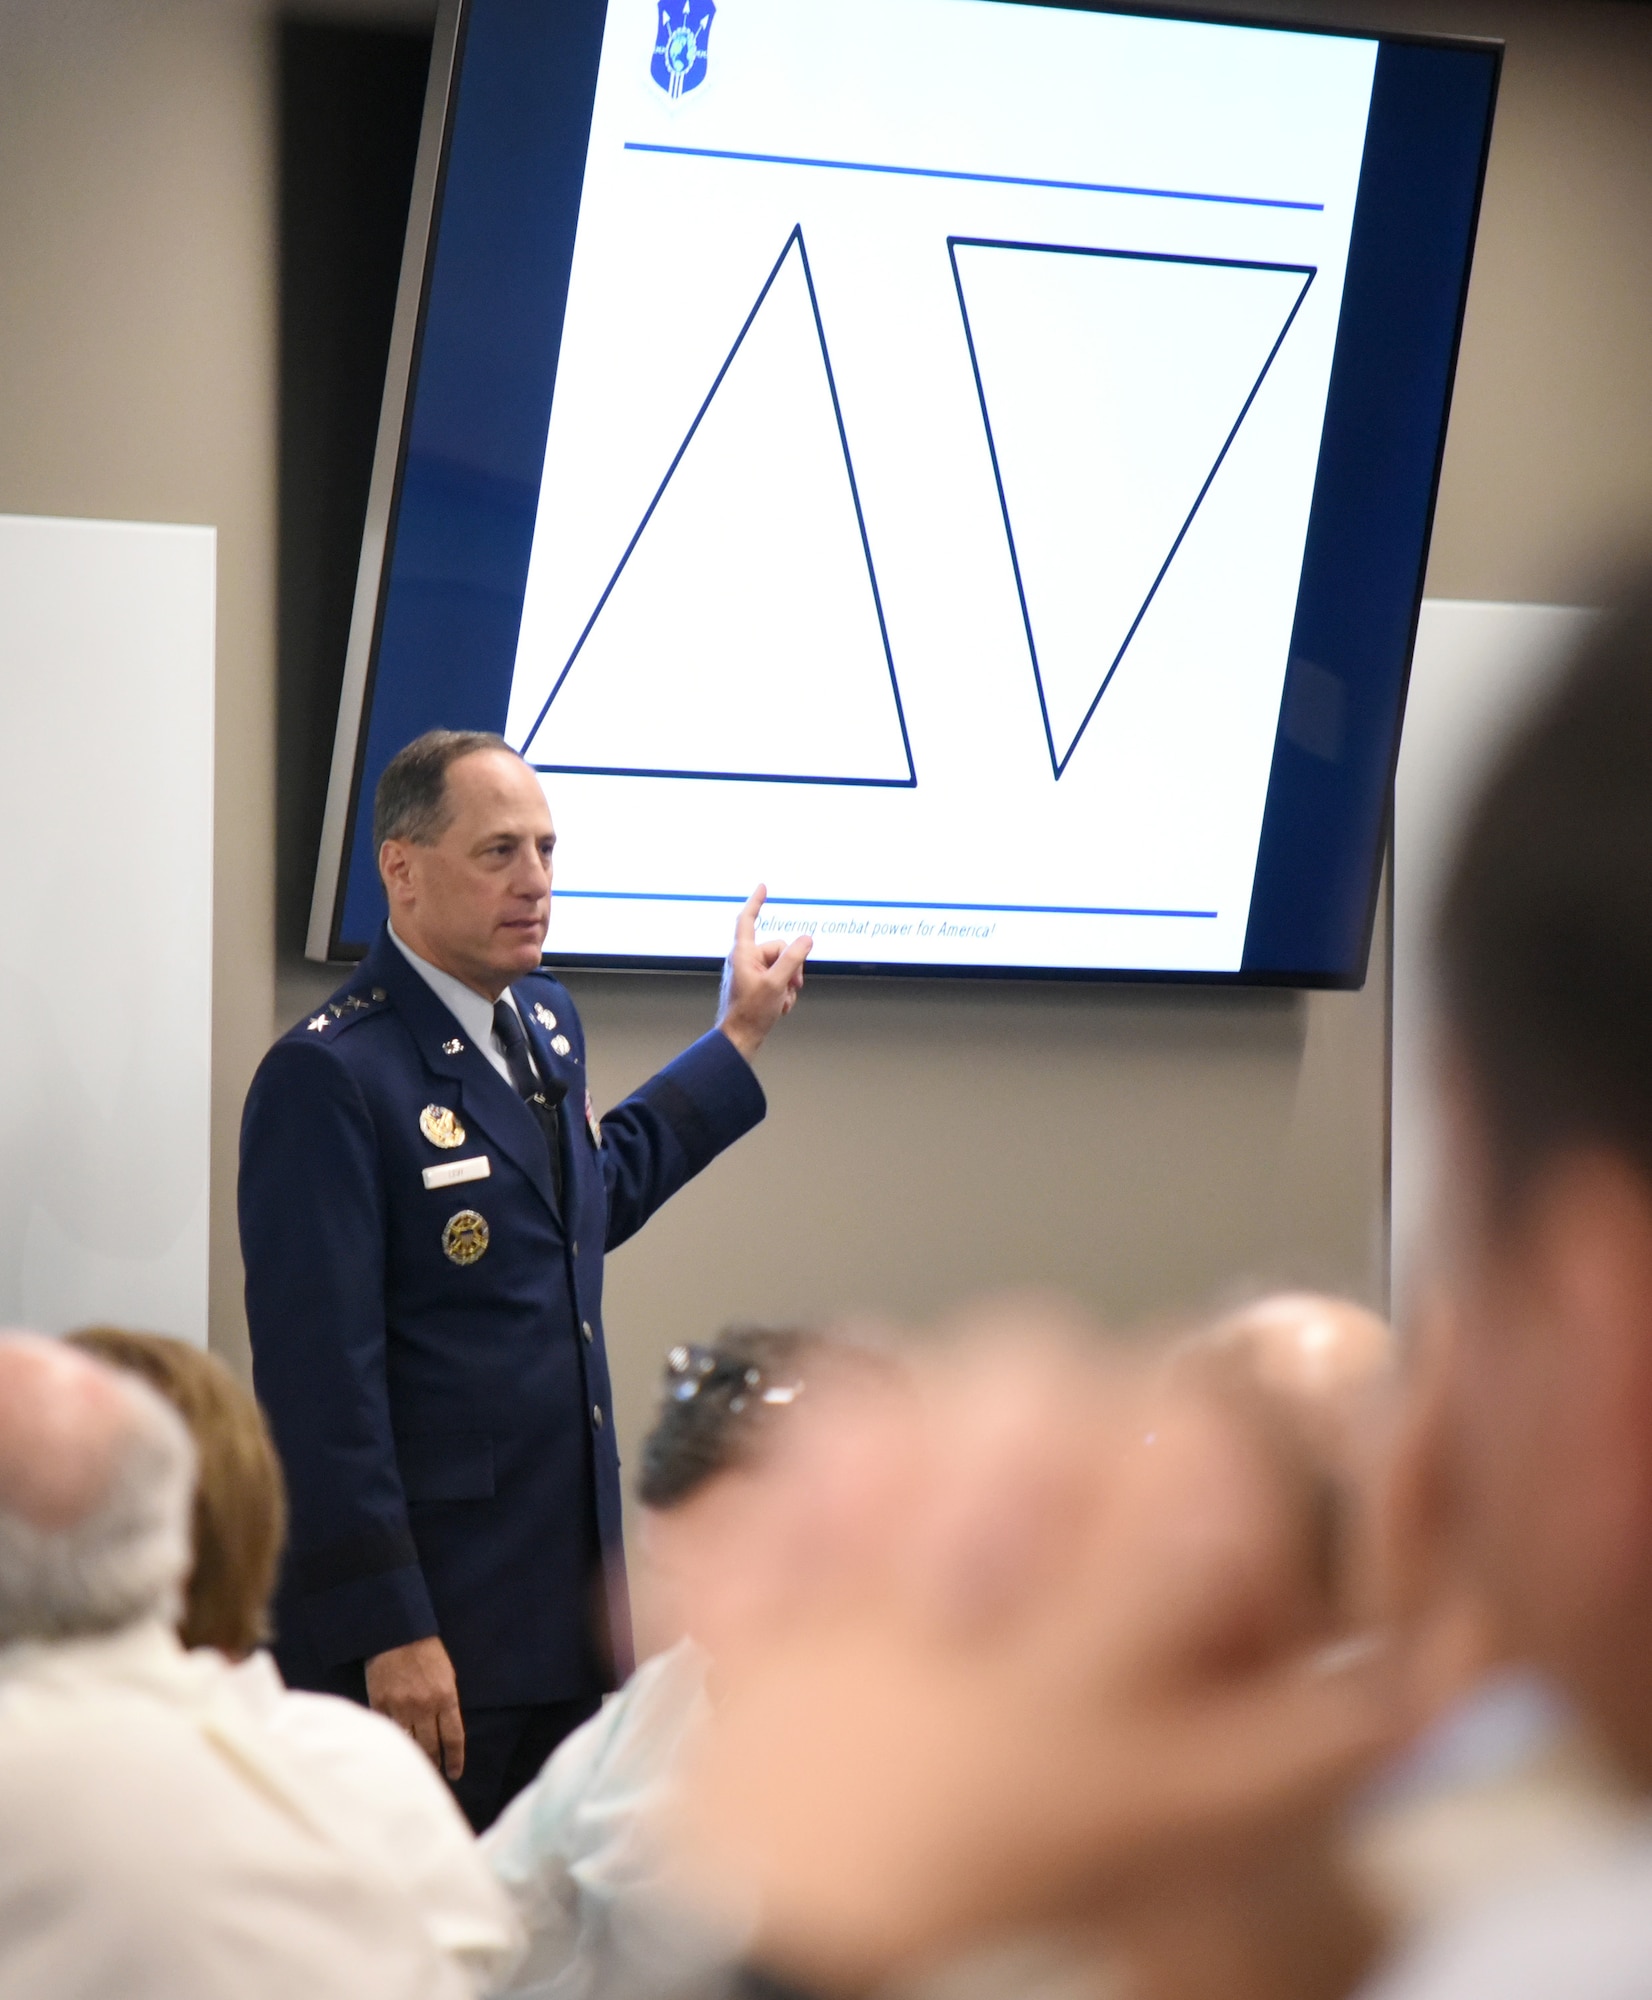 Lt. Gen. Lee K. Levy II discusses leadership styles at an event June 28. He was the inaugural speaker of a distinguished speaker series hosted at the Gene Rainbolt Graduate School of Business at the University of Oklahoma Health Science Center. His lecture centered on the theme of “Intersection of Innovation + Armed Services.”